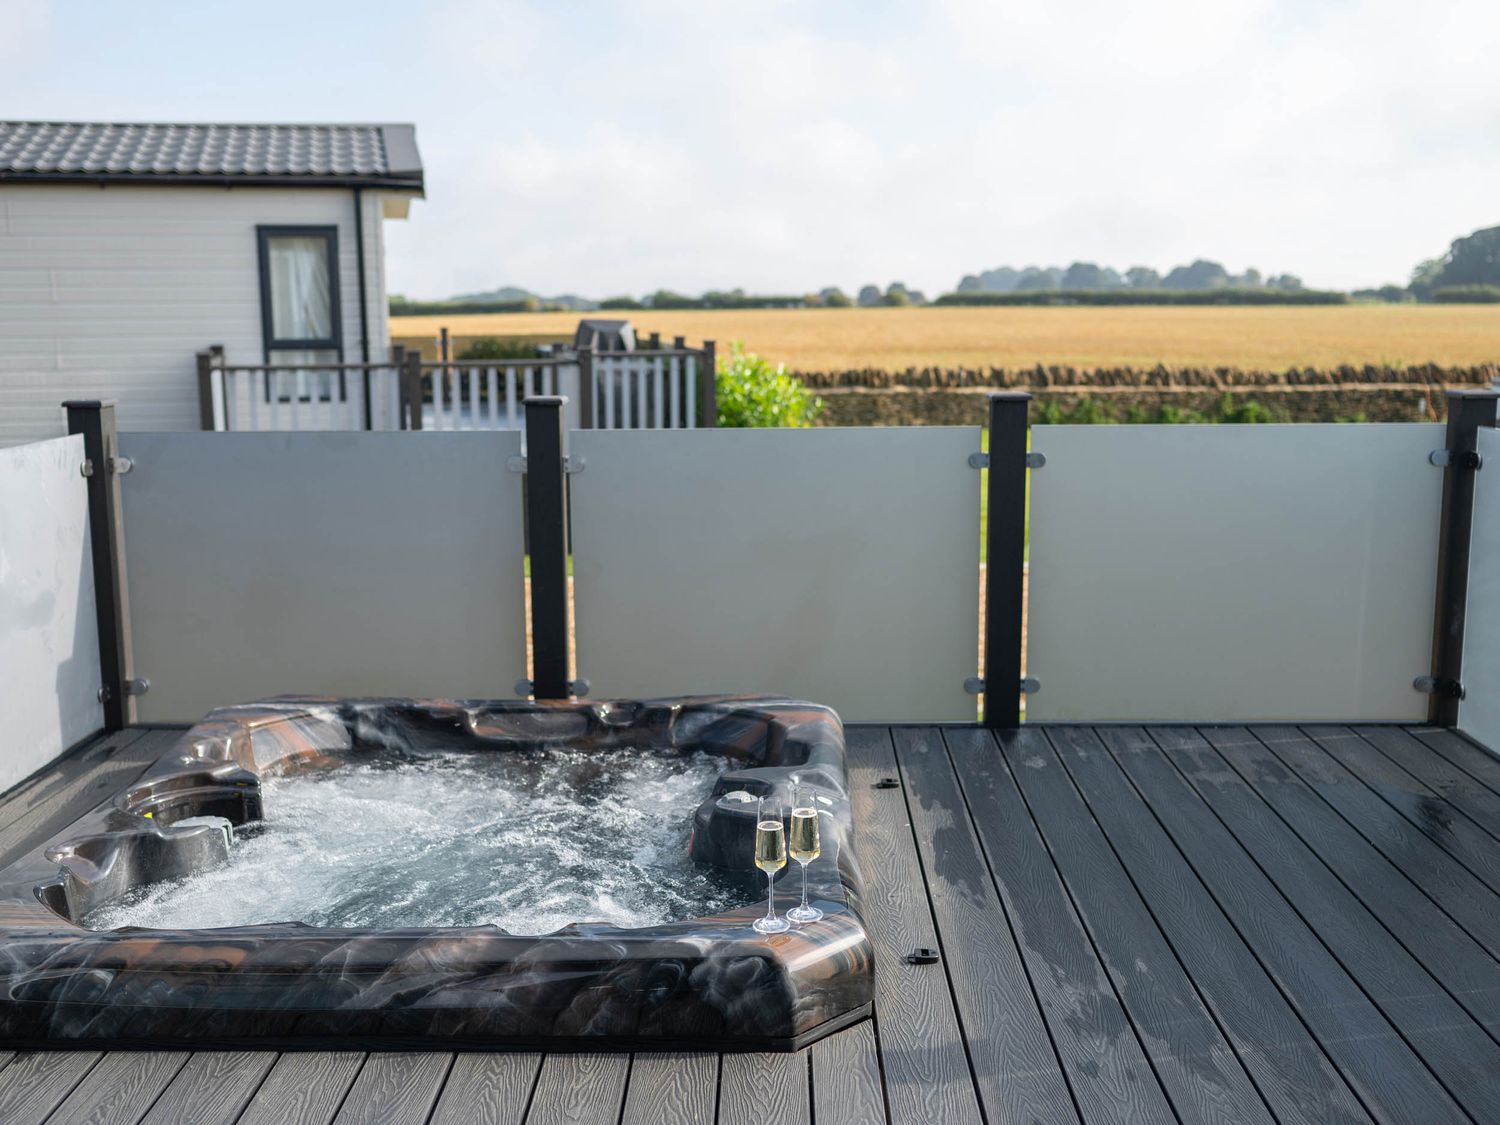 Lodge is in Chipping Norton, Oxfordshire. Two-bedroom lodge near AONB. Stylish. Hot tub. Rural views